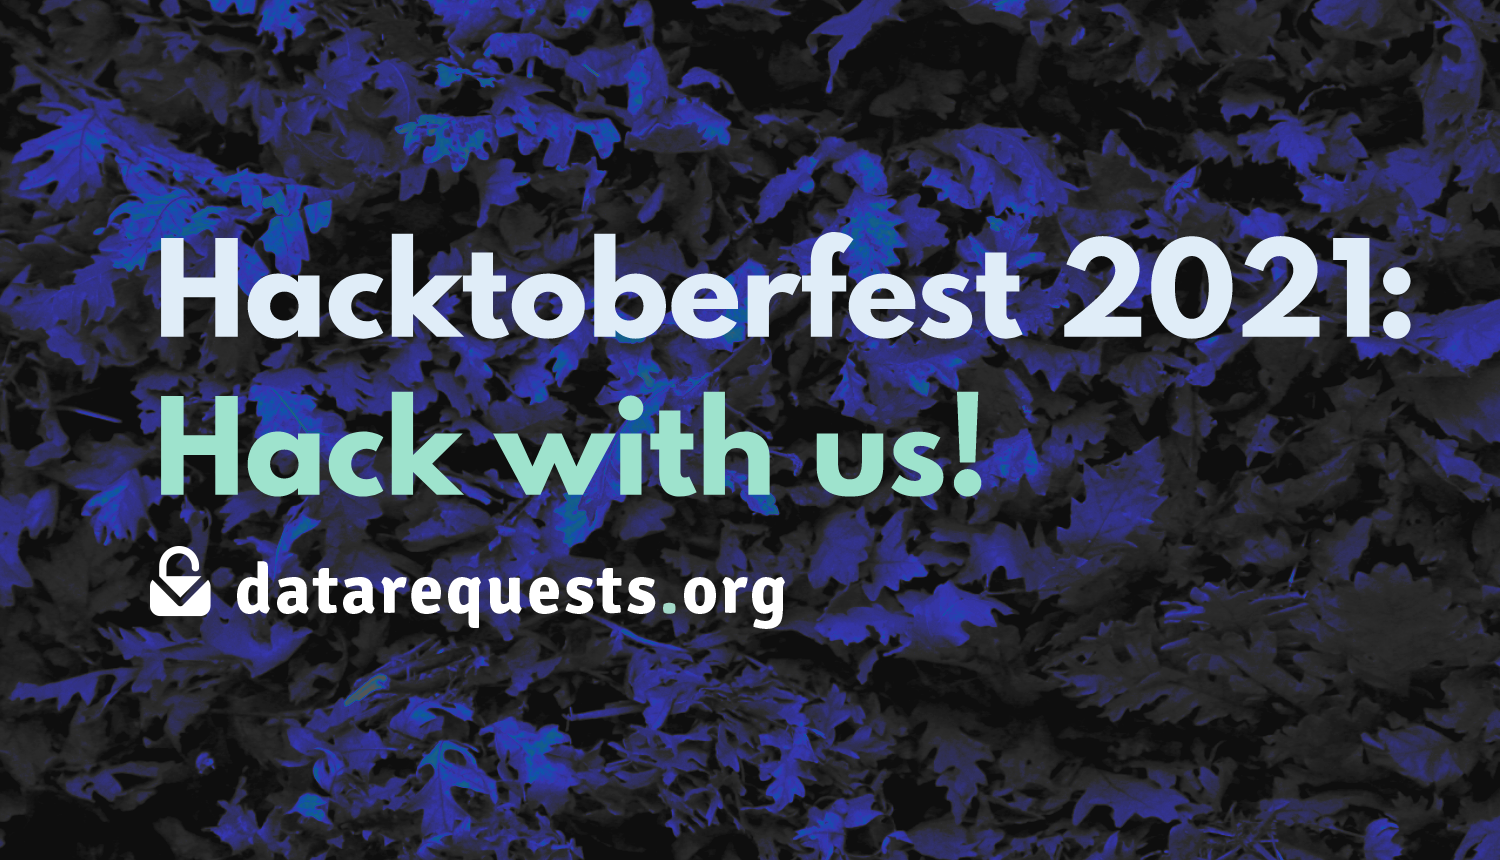 Written in front of leaves: "Hacktoberfest 2021: Hack with us!"